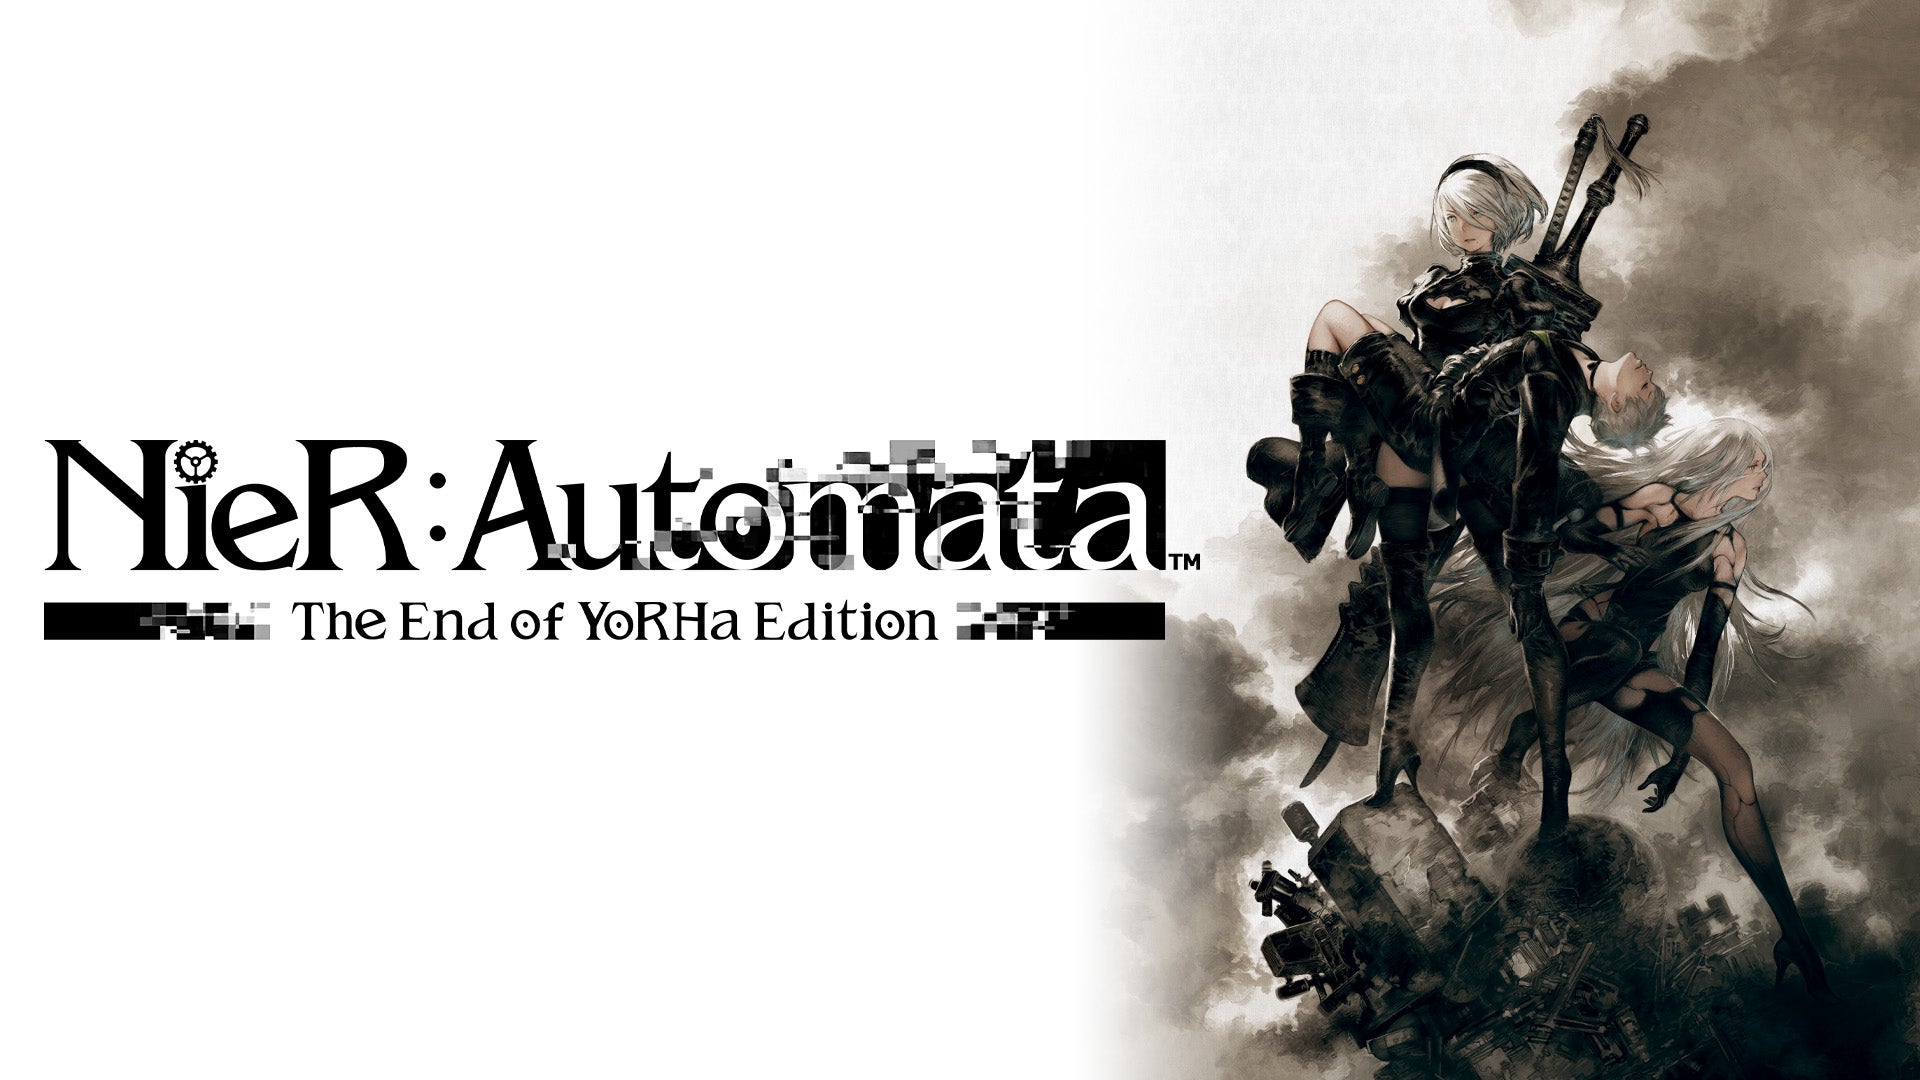 Image for Nier Automata is coming to Switch this October